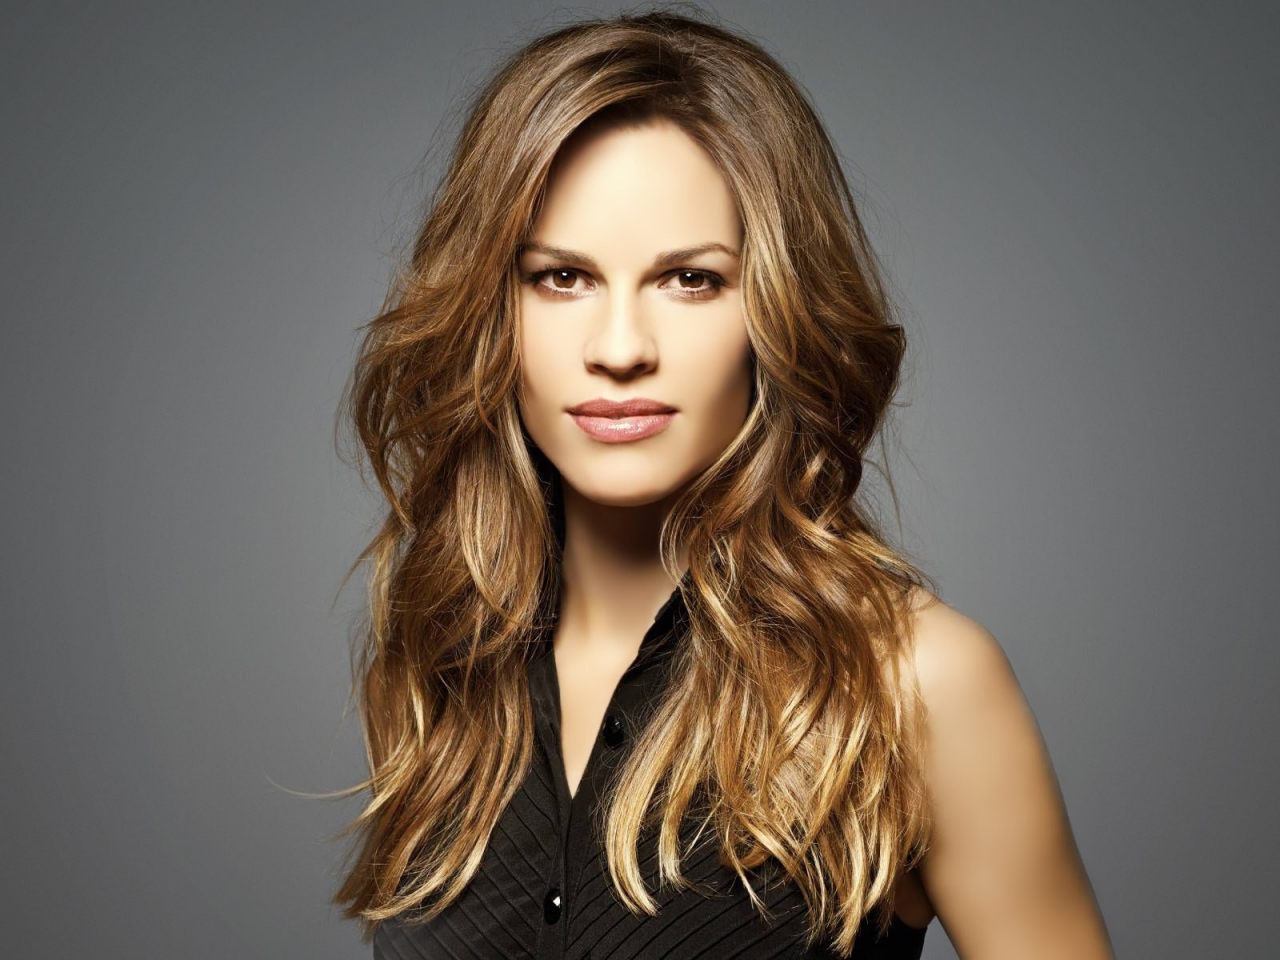 Gorgeous Hilary Swank for 1280 x 960 resolution